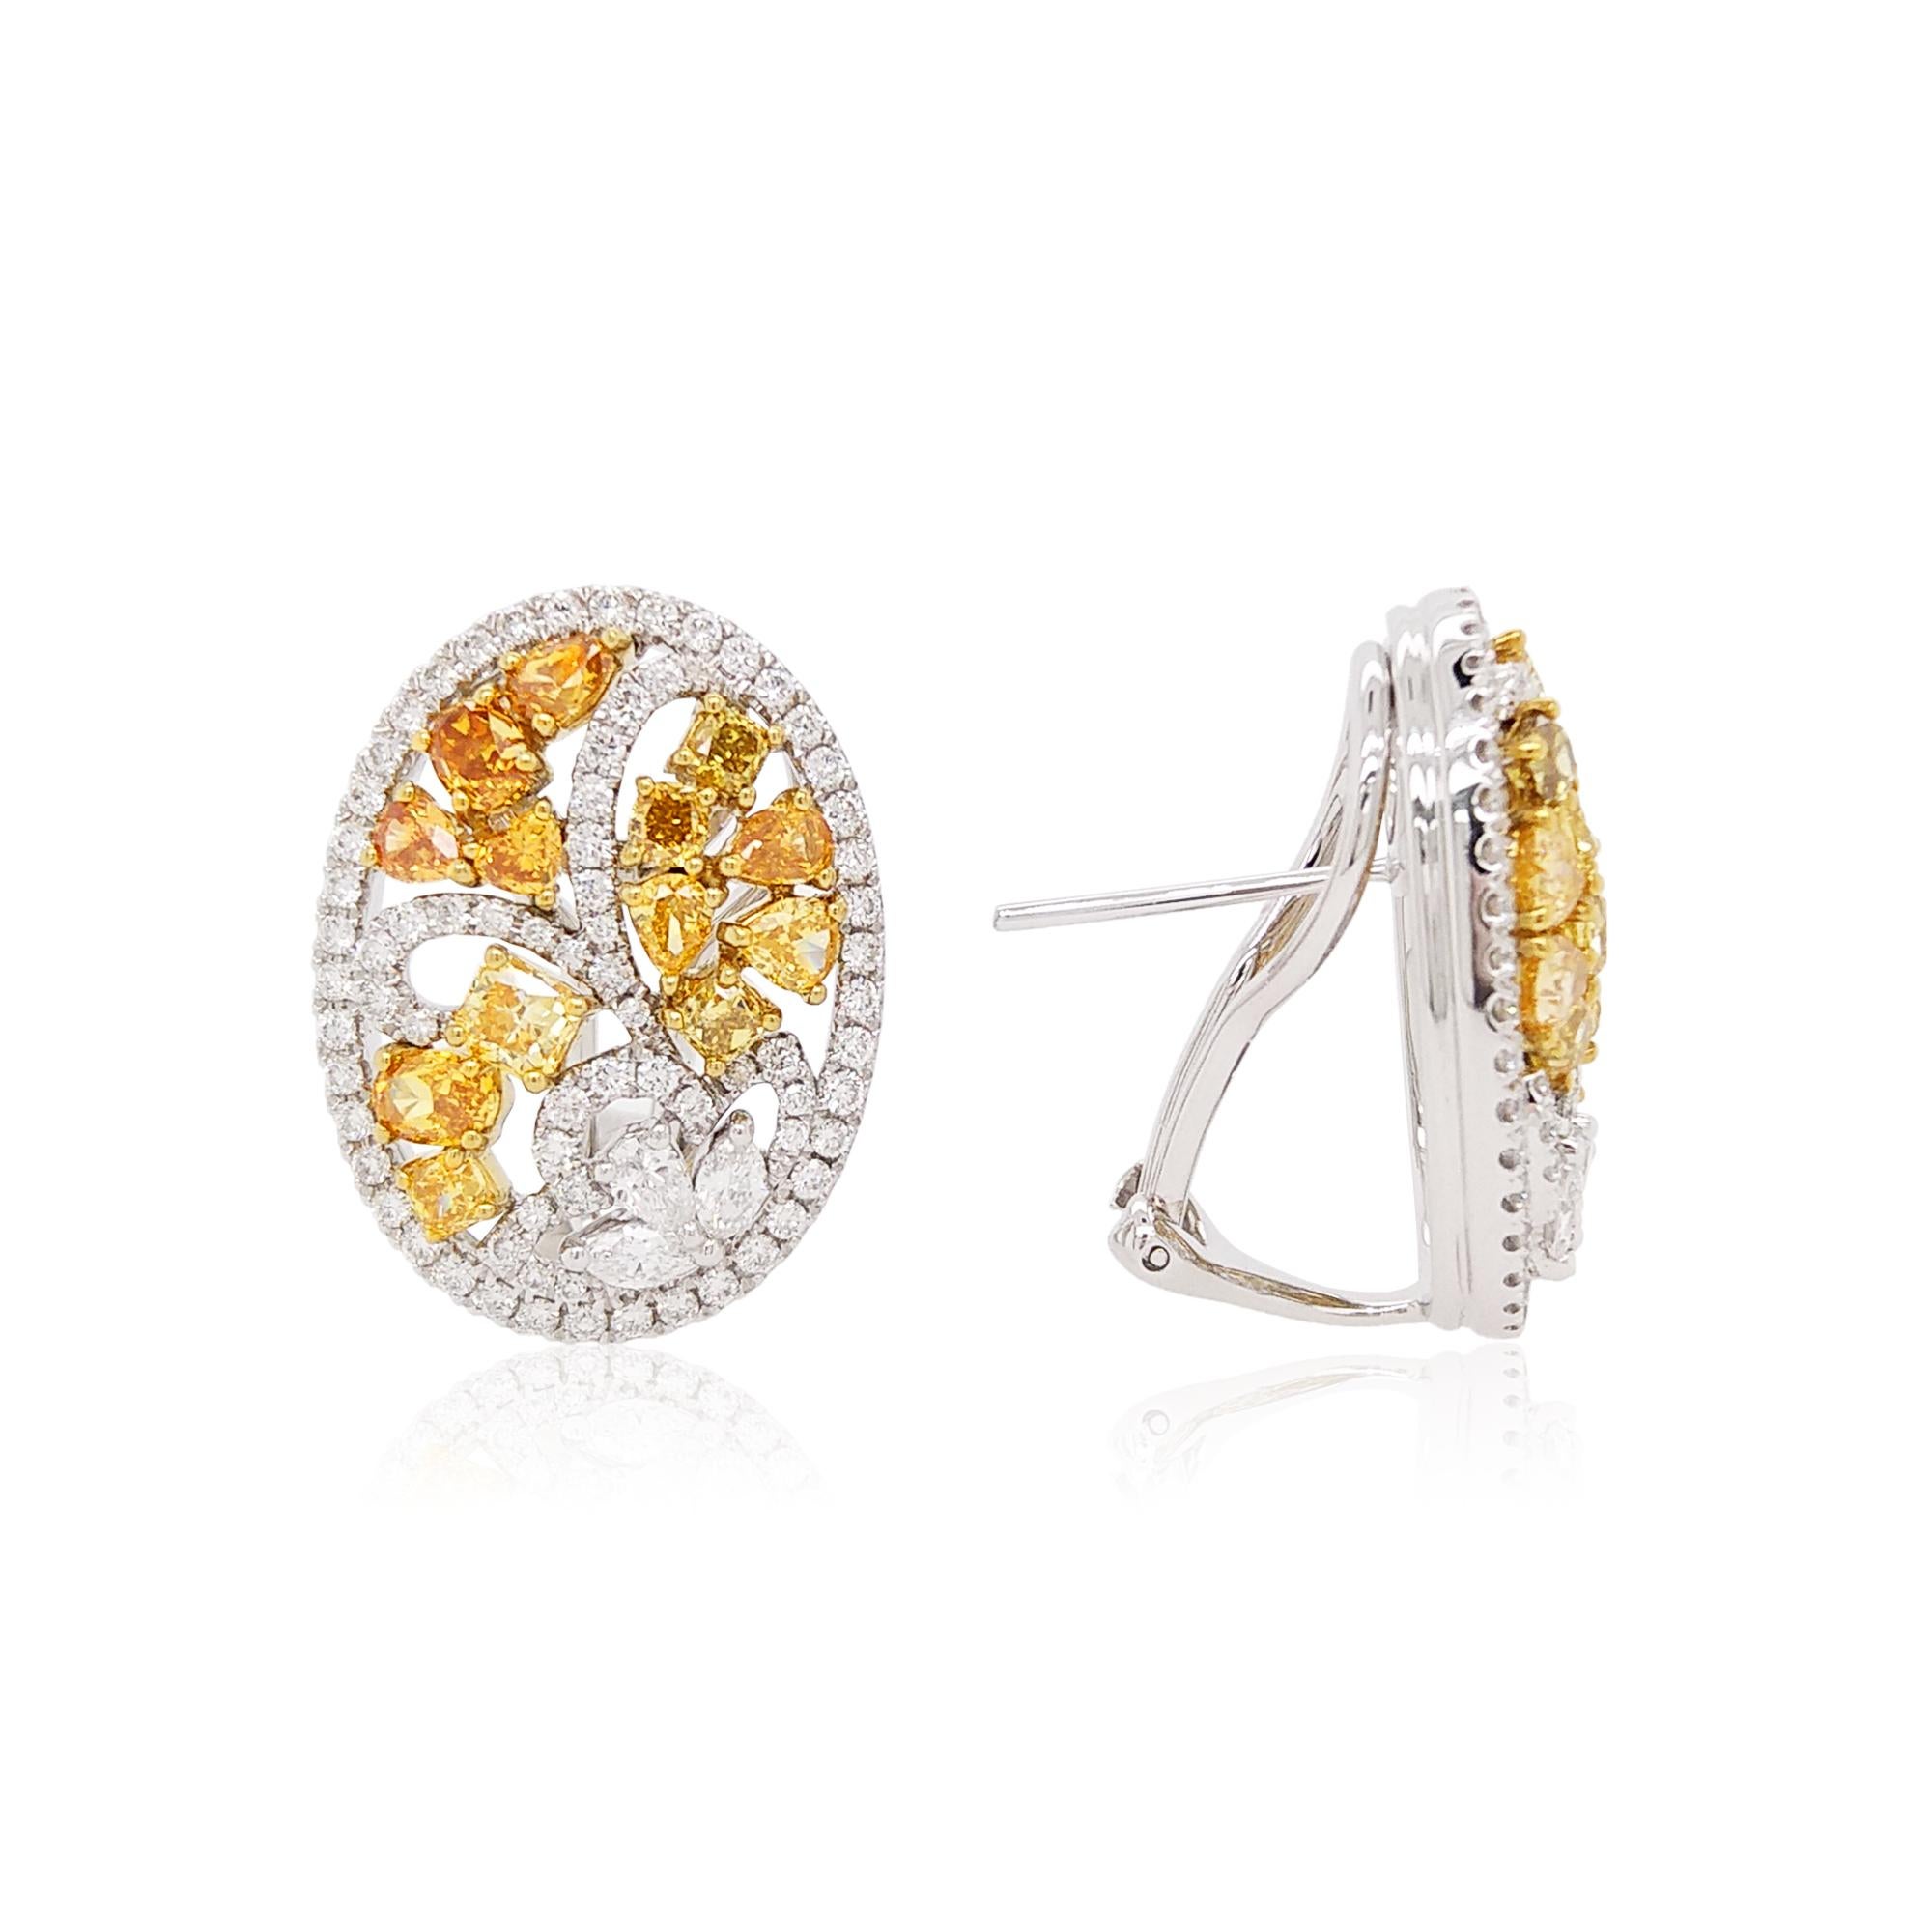 These elegant earrings are an ornate arrangement of Yellow and White Diamonds. Each of the diamonds has been hand-selected and expertly matched due to their superior lustre, colour, and shape, ensuring that each piece is truly spectacular. The rich